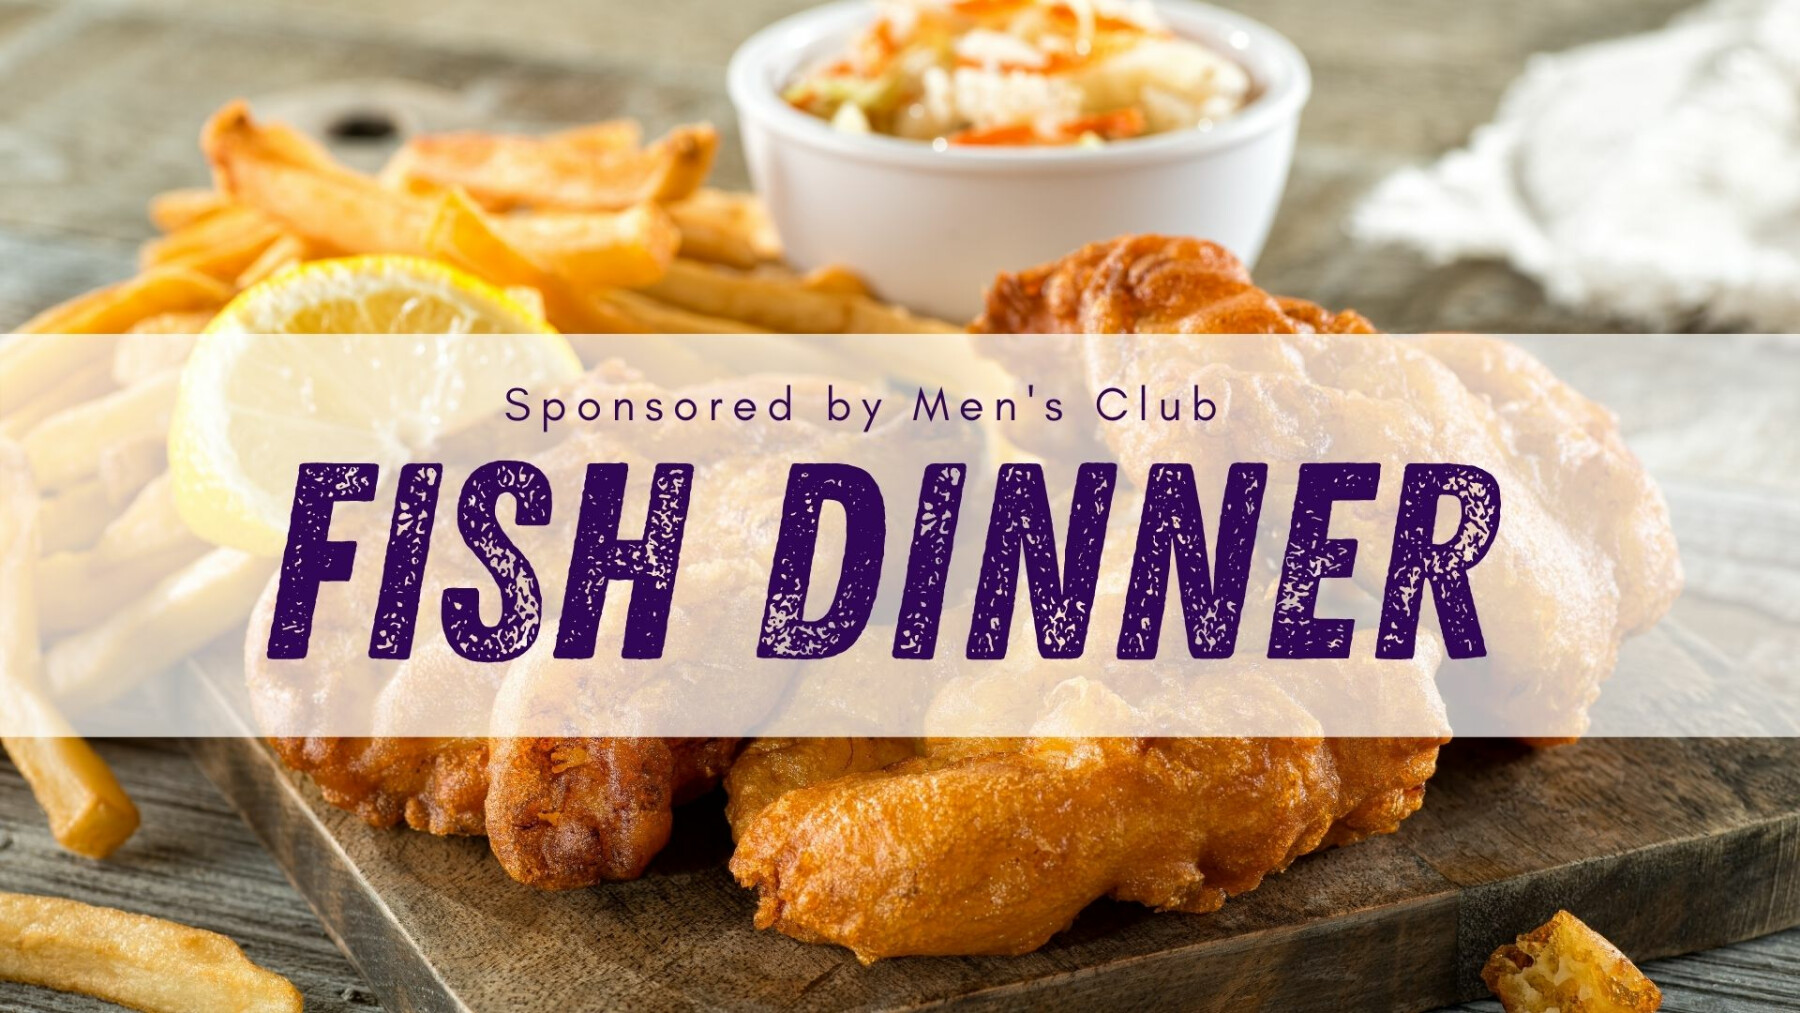 Lenten Fish Dinner Pick up Times 5:00pm-6:00pm & 6:30pm-7:00pm (must pre-order)